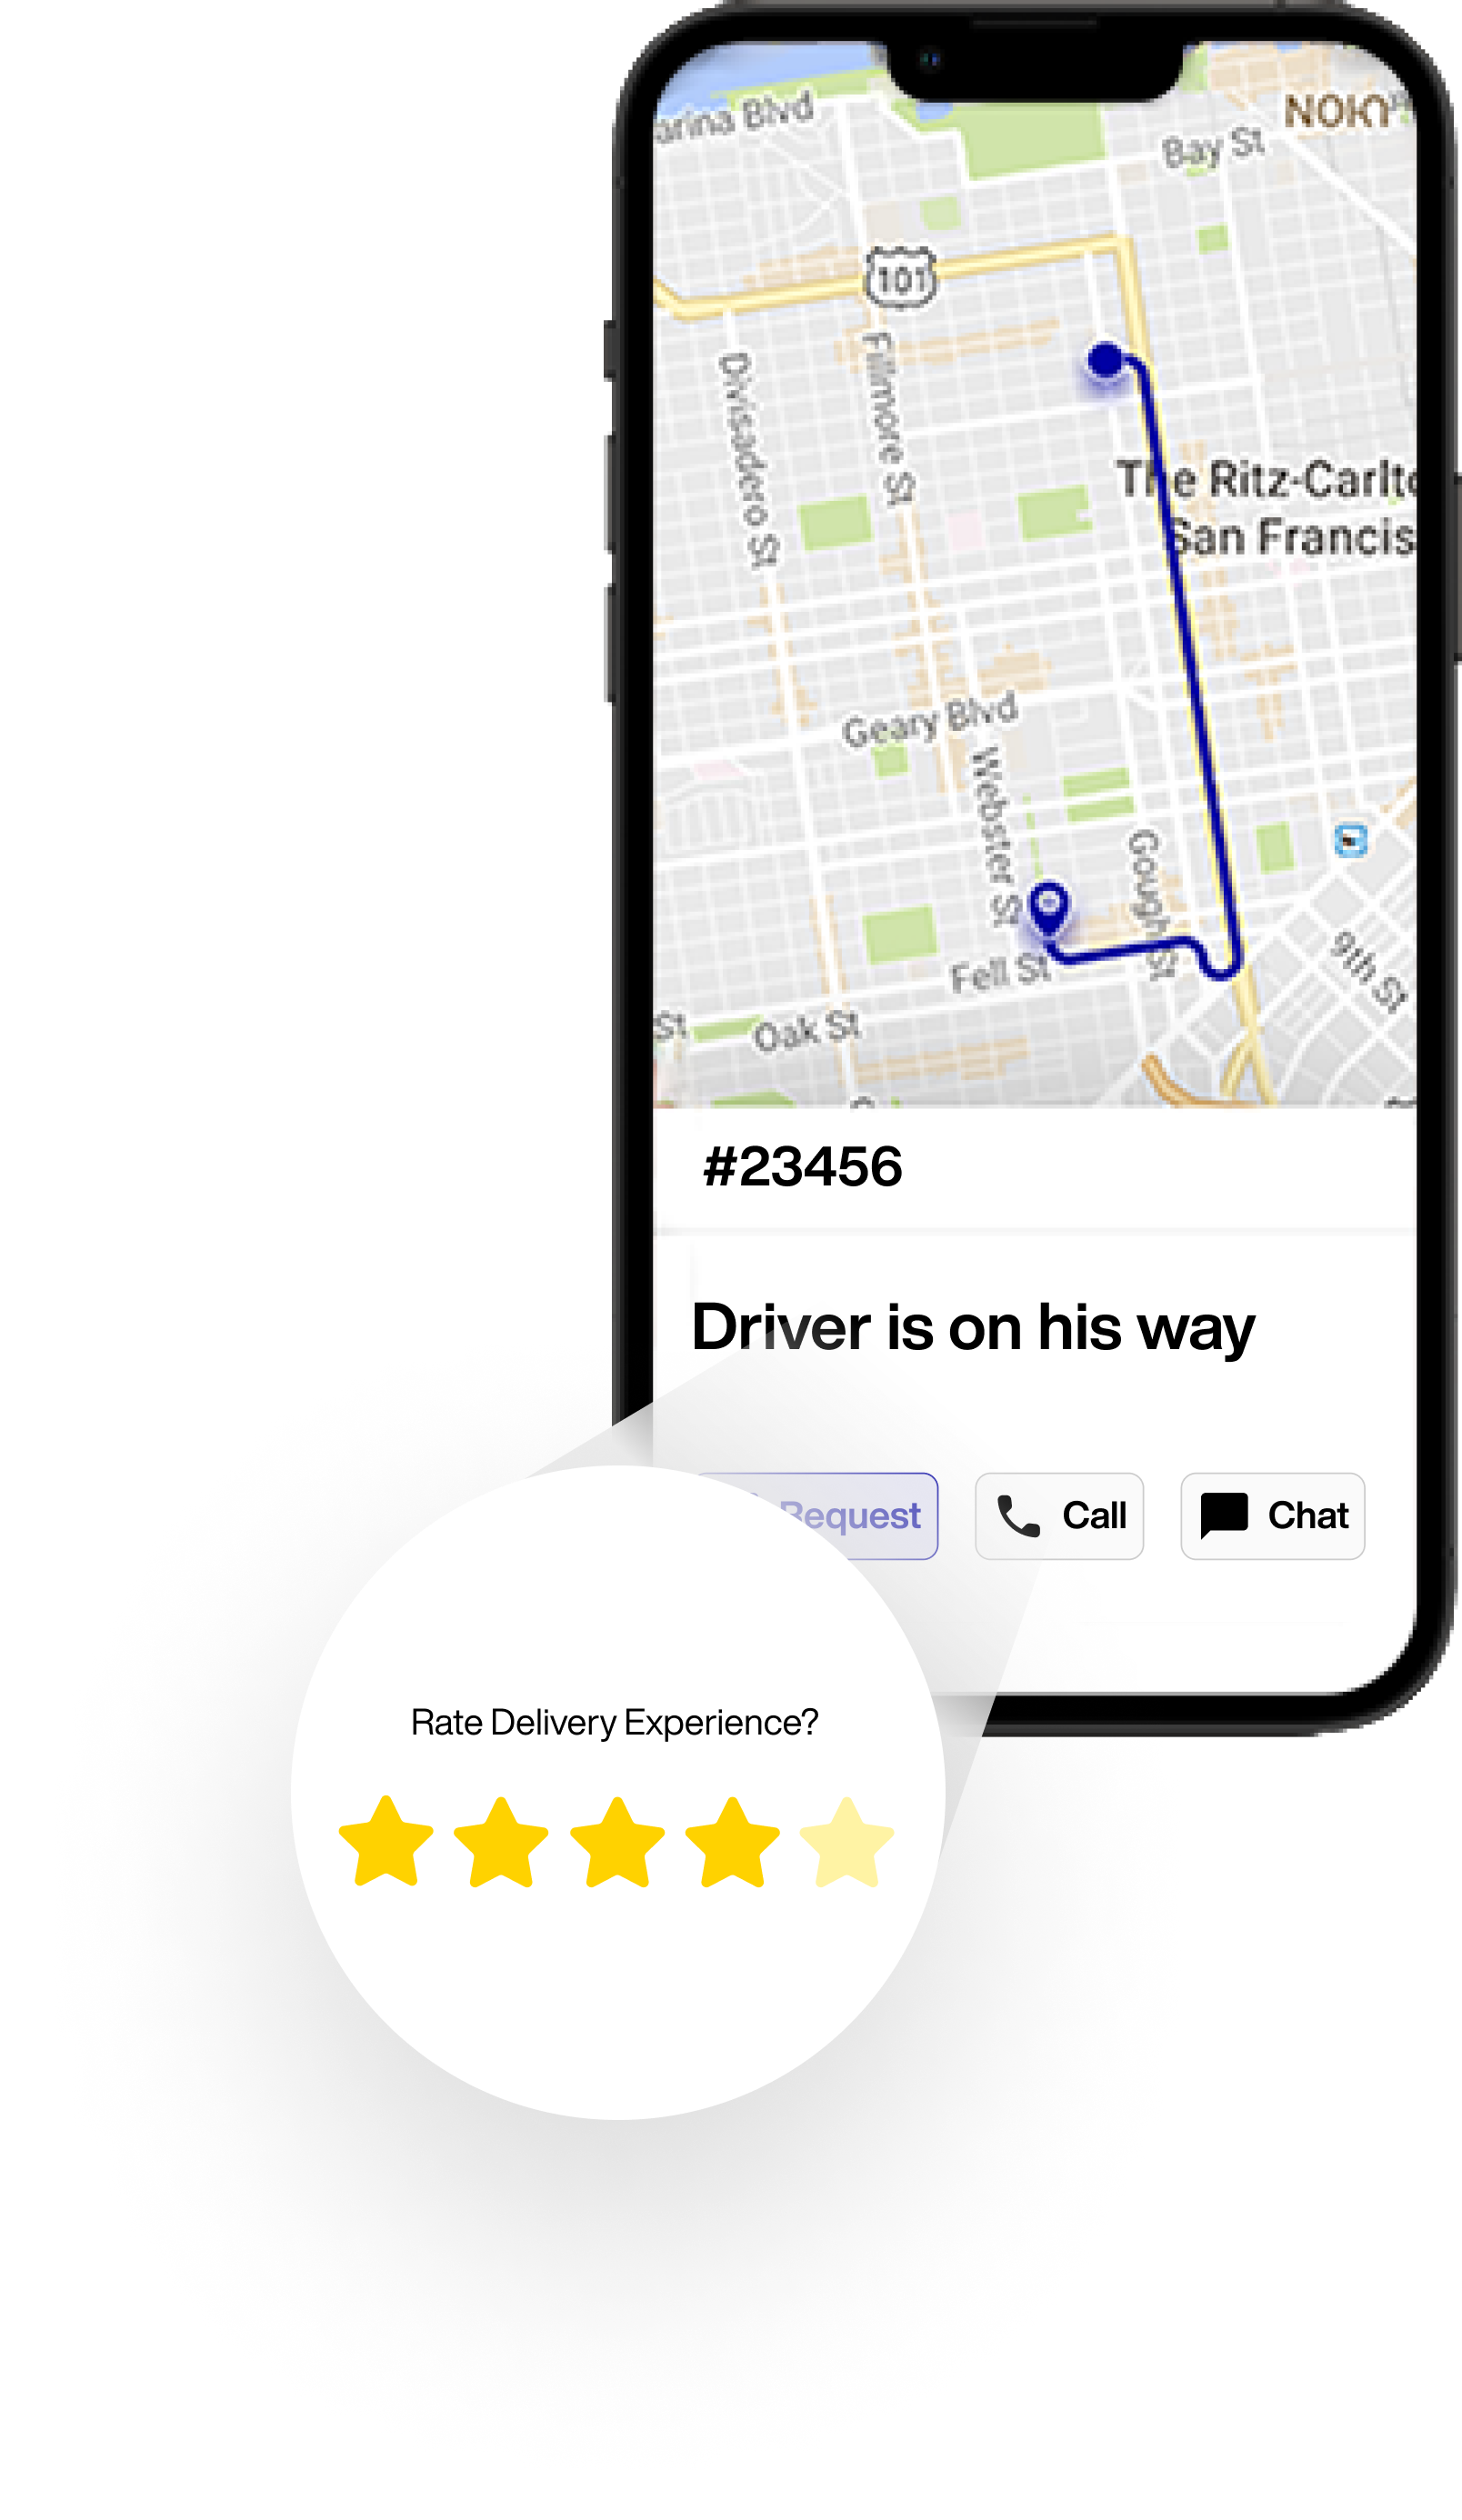 Keep customers updated throughout the order delivery journey. Our drivers tracking, communications, rating, and feedback features are designed to keep customers engaged and to ensure and monitor their satisfaction